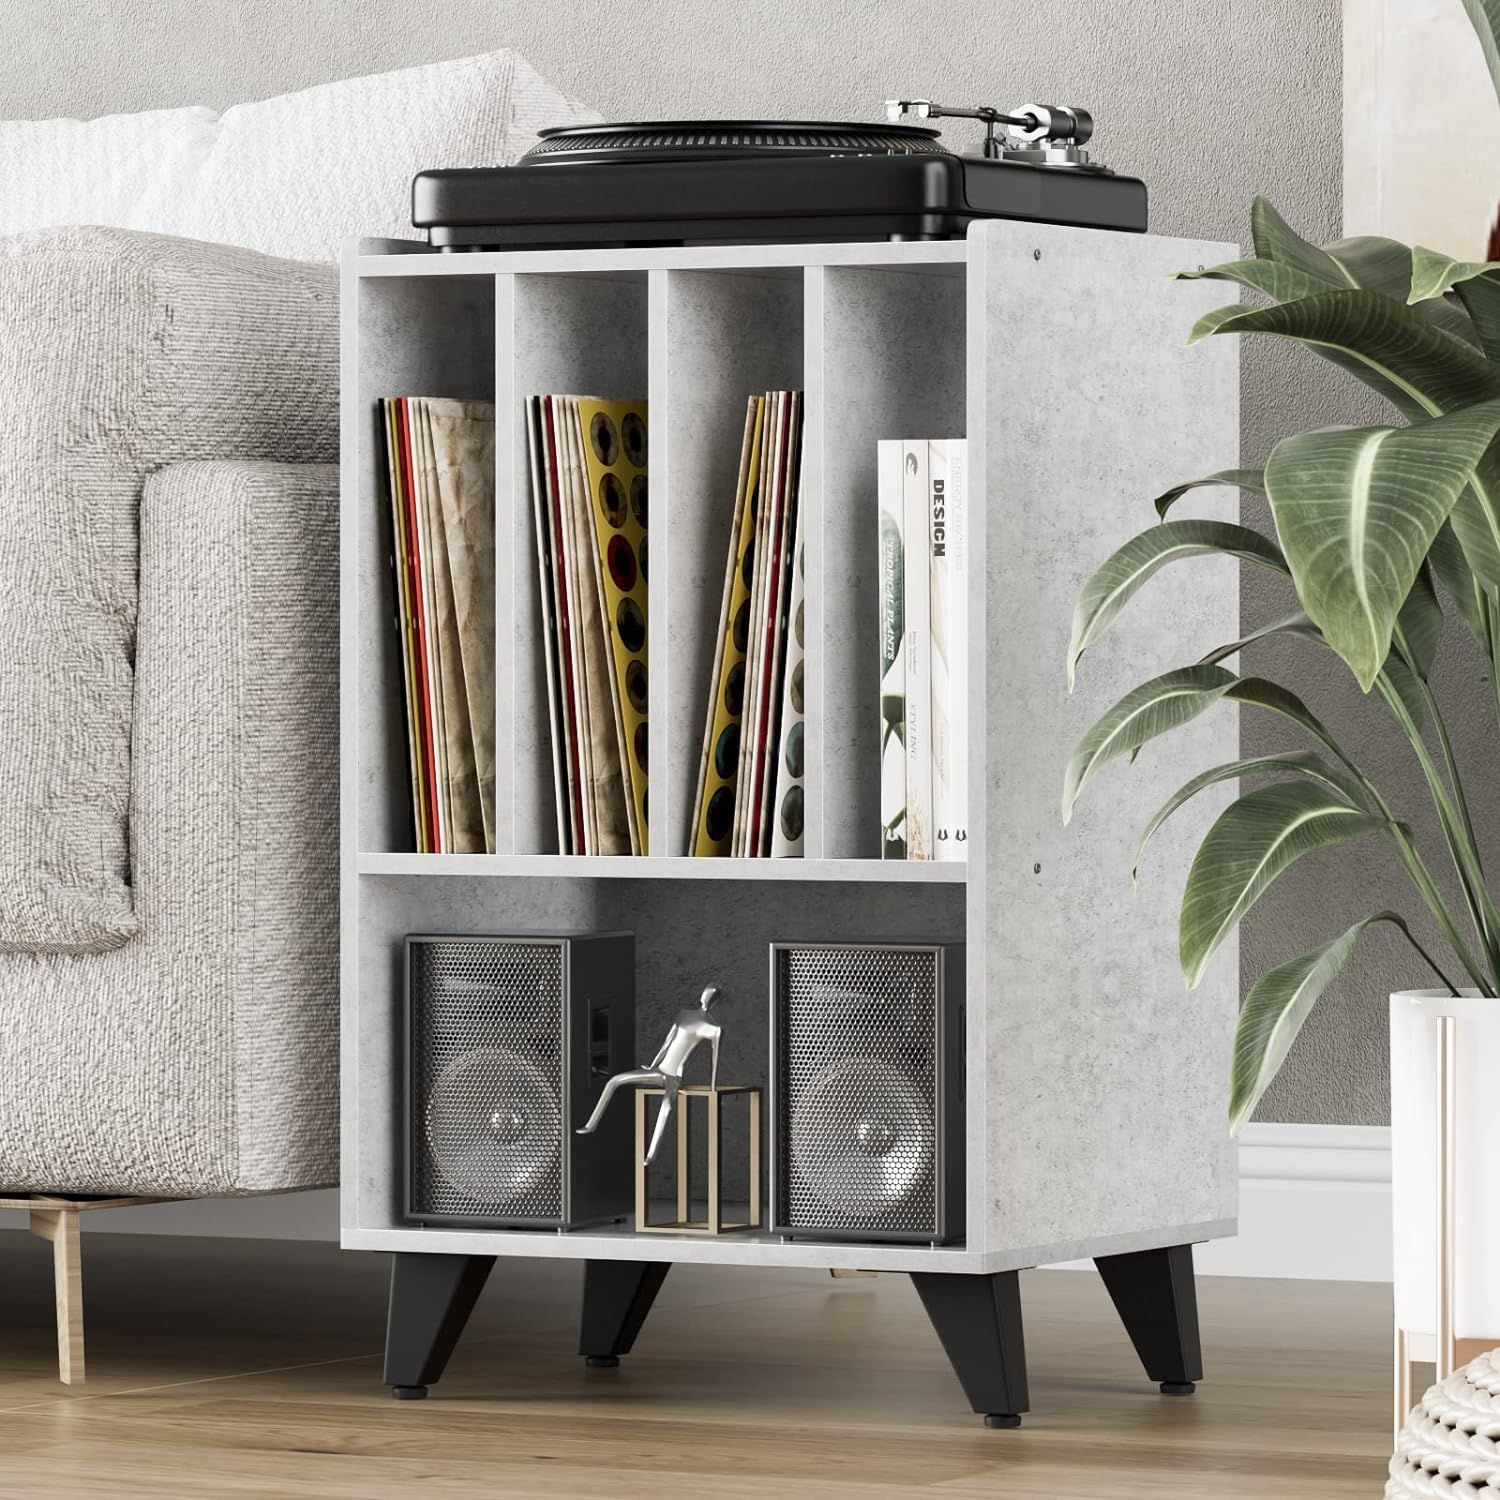 Gannyfer Vinyl Record Storage Table, 3-Tier Record Player Stand with Metal Legs, Cube Turntable Stand Record Holder Up to 150 Albums, Retro Vinyl